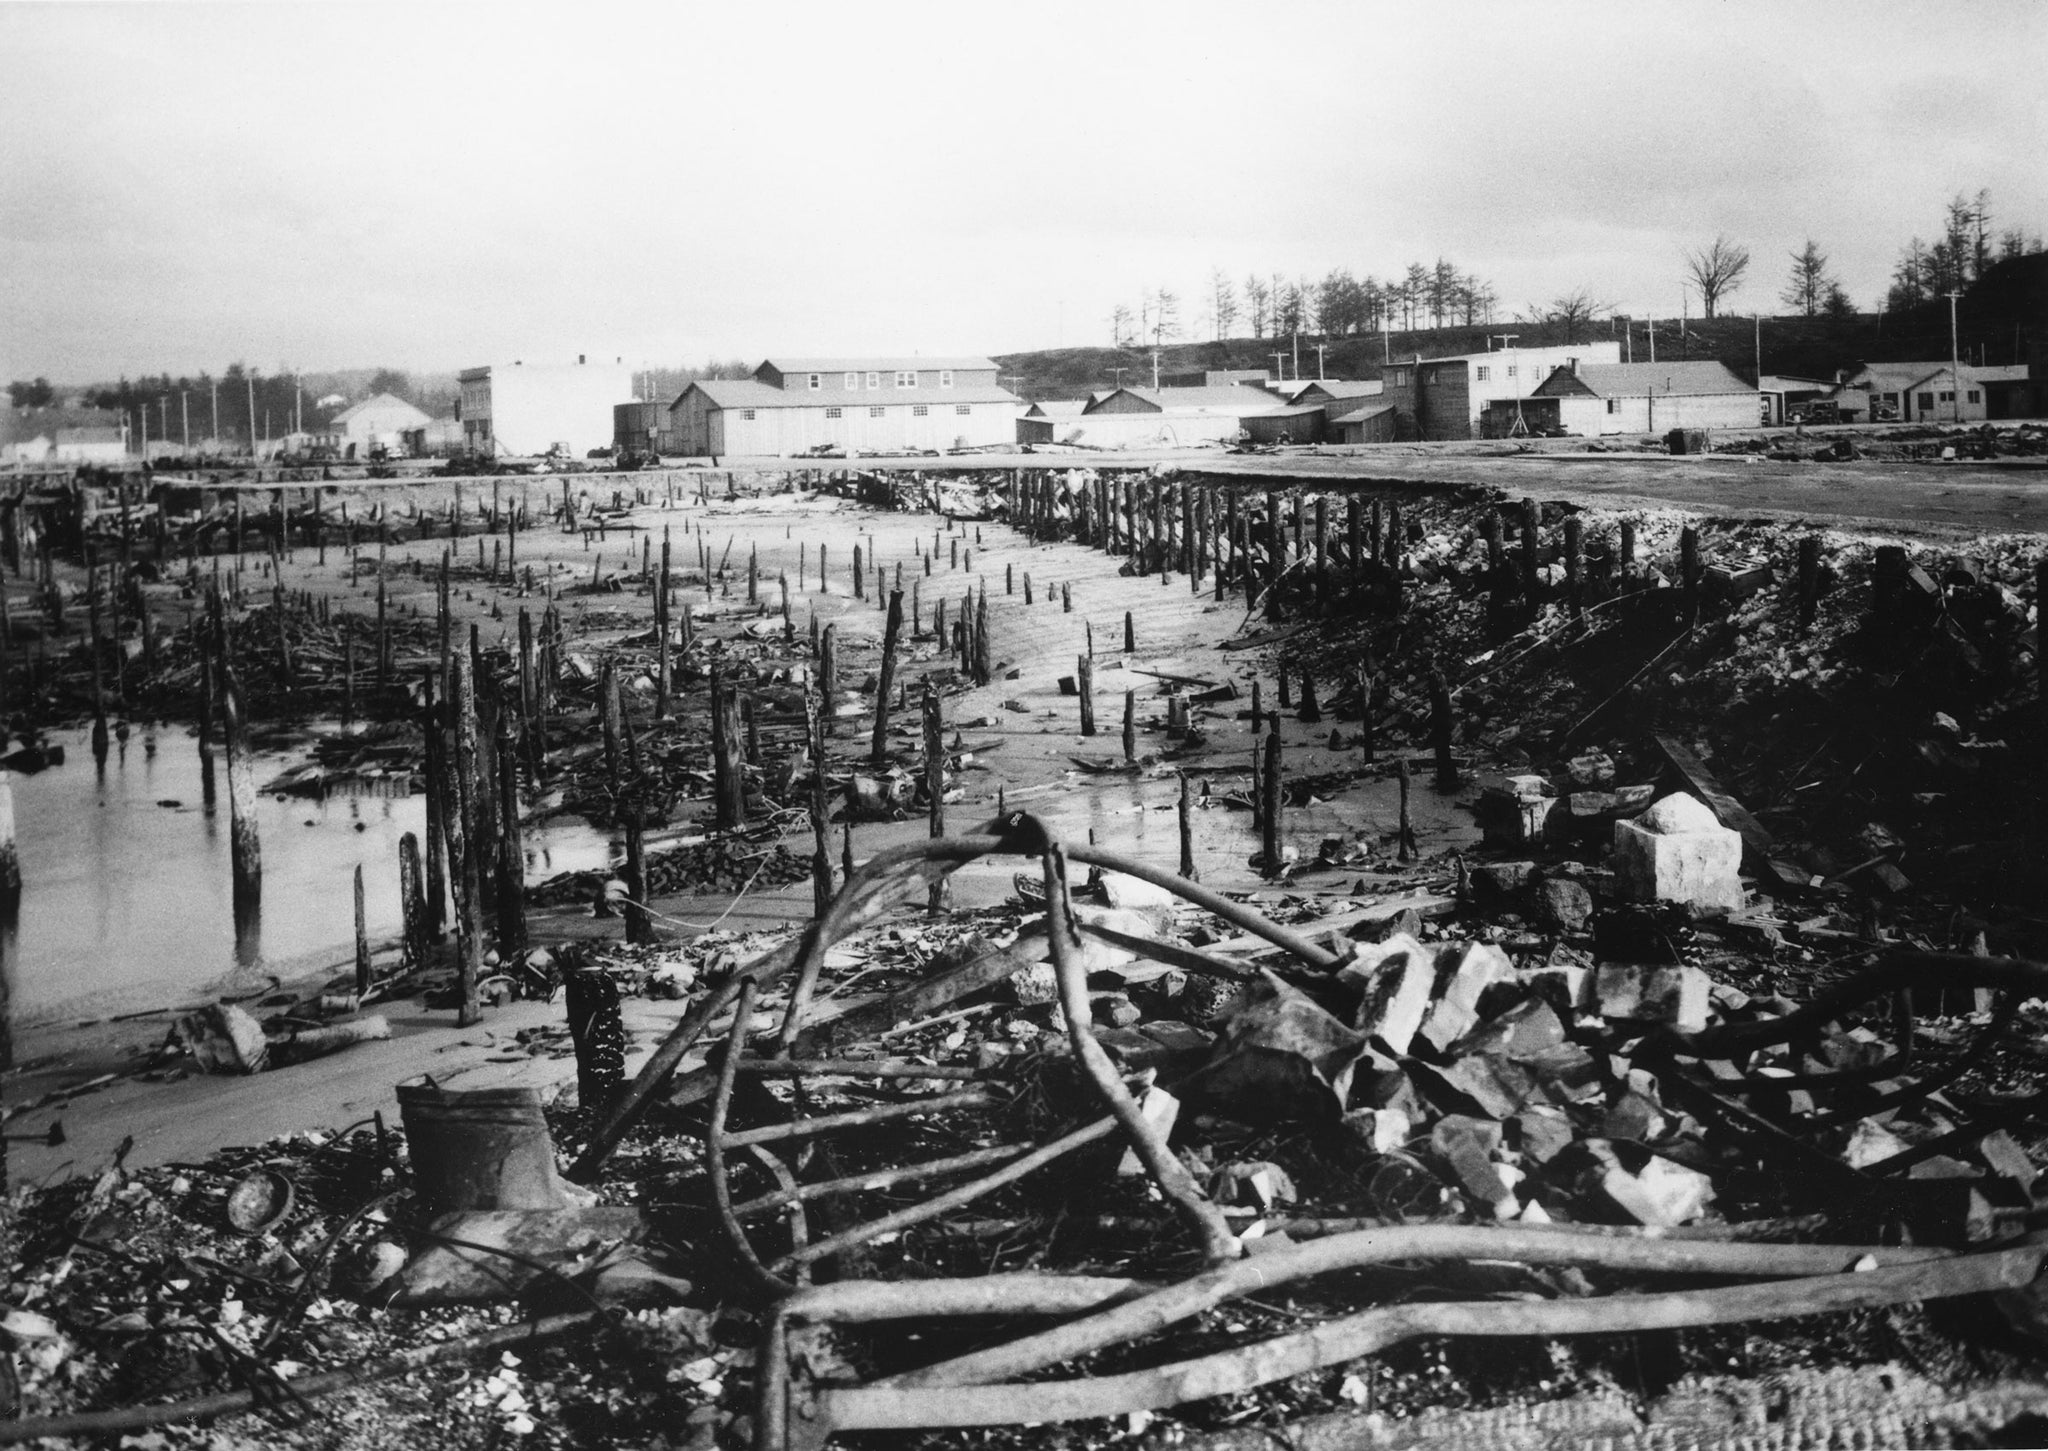 Devastation and rebuilding after the 1936 Bandon Fire. -- Courtesy Bandon Historical Society Museum / #28850